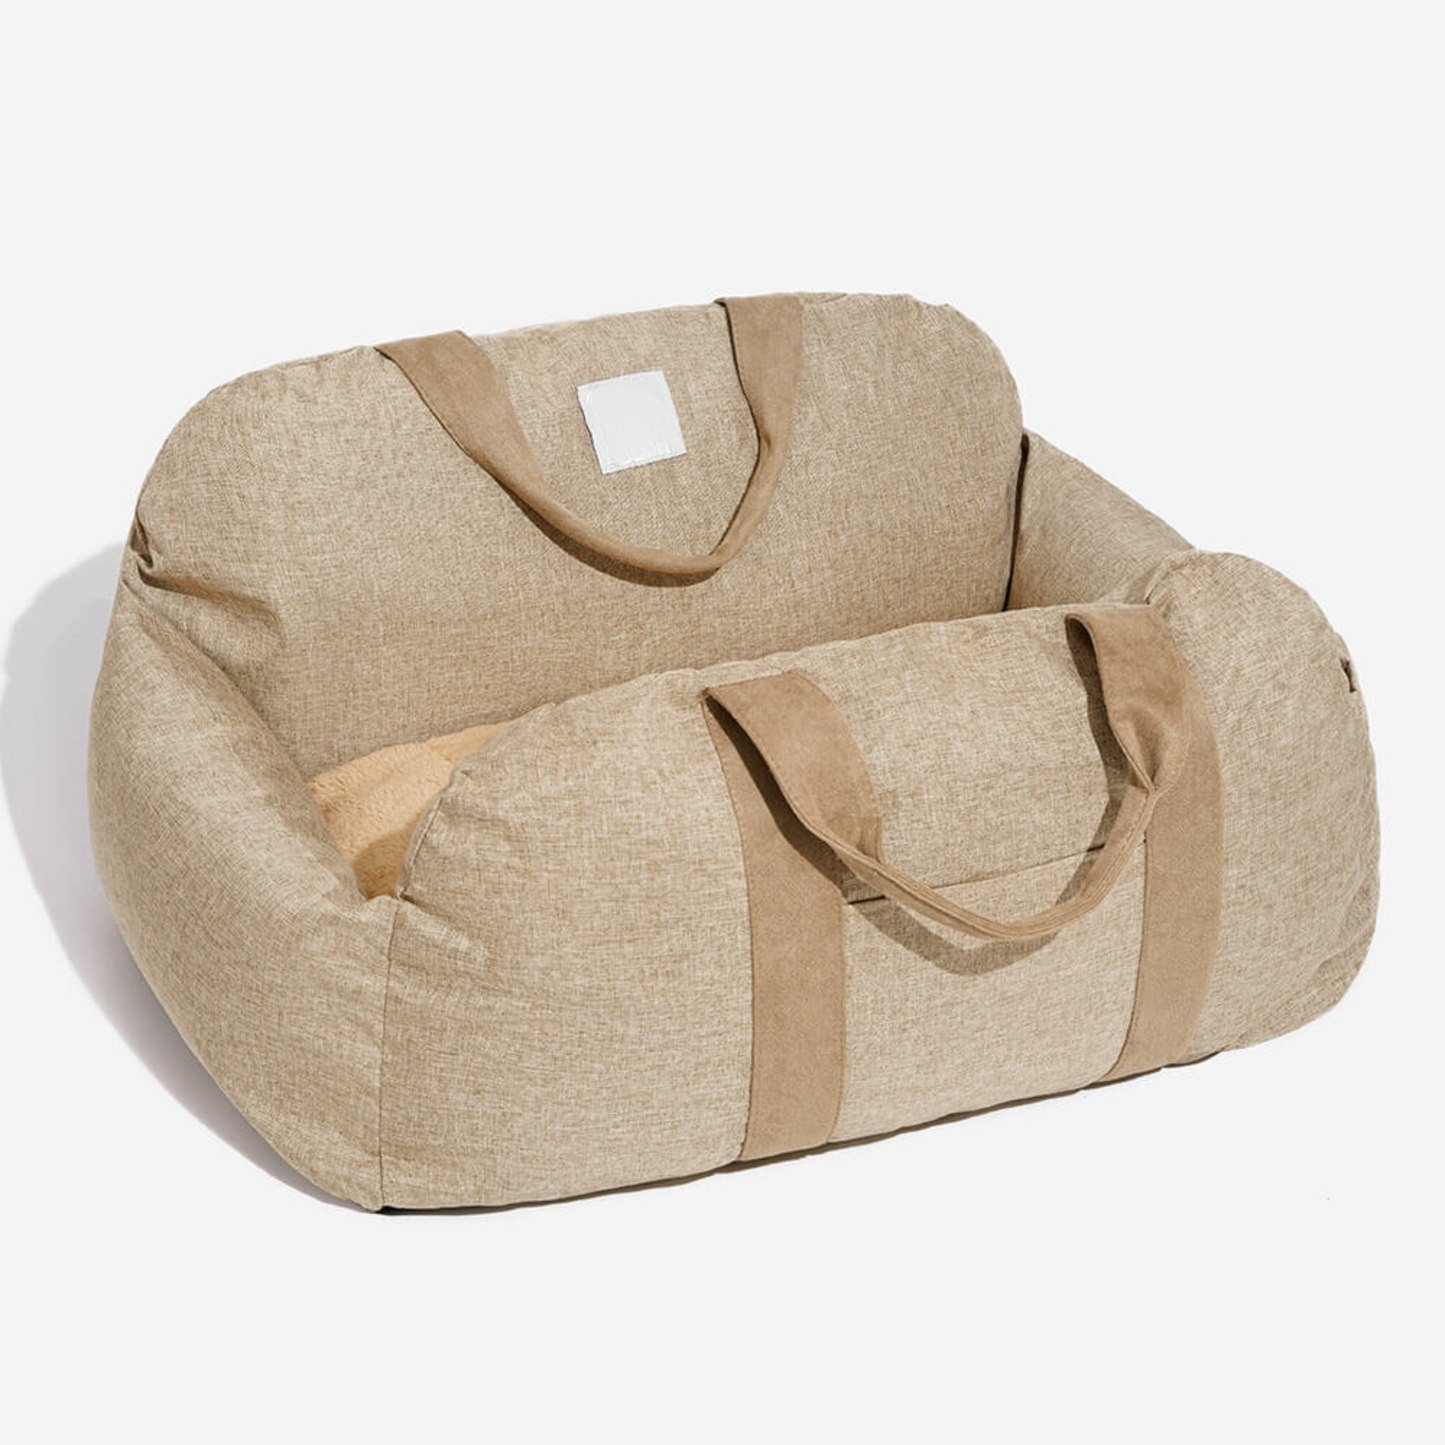 Luxurious Dog Car Bed